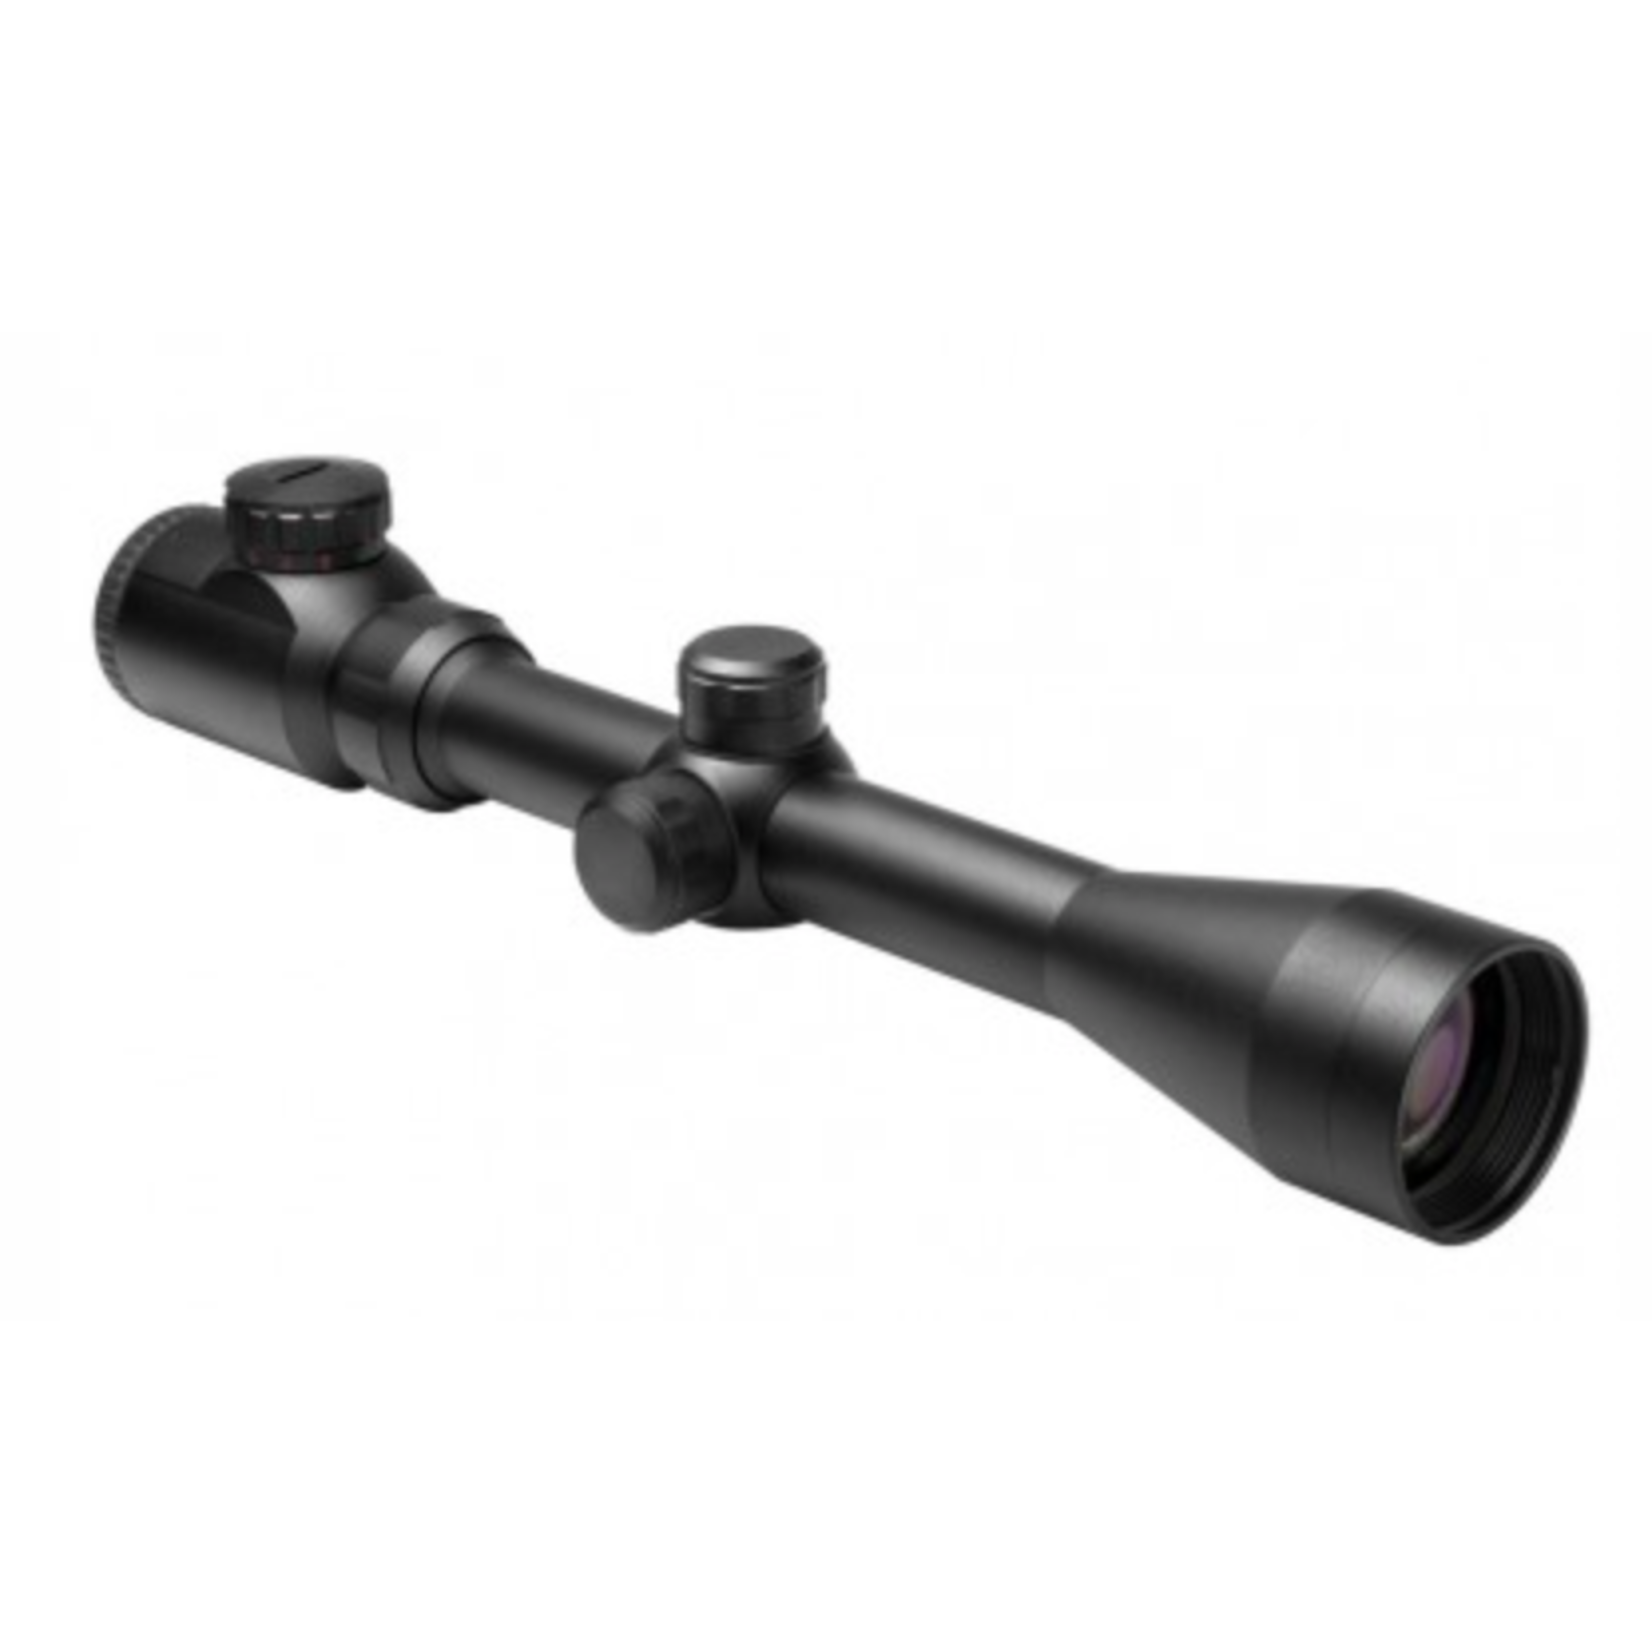 NC Star Shooter Series Scope